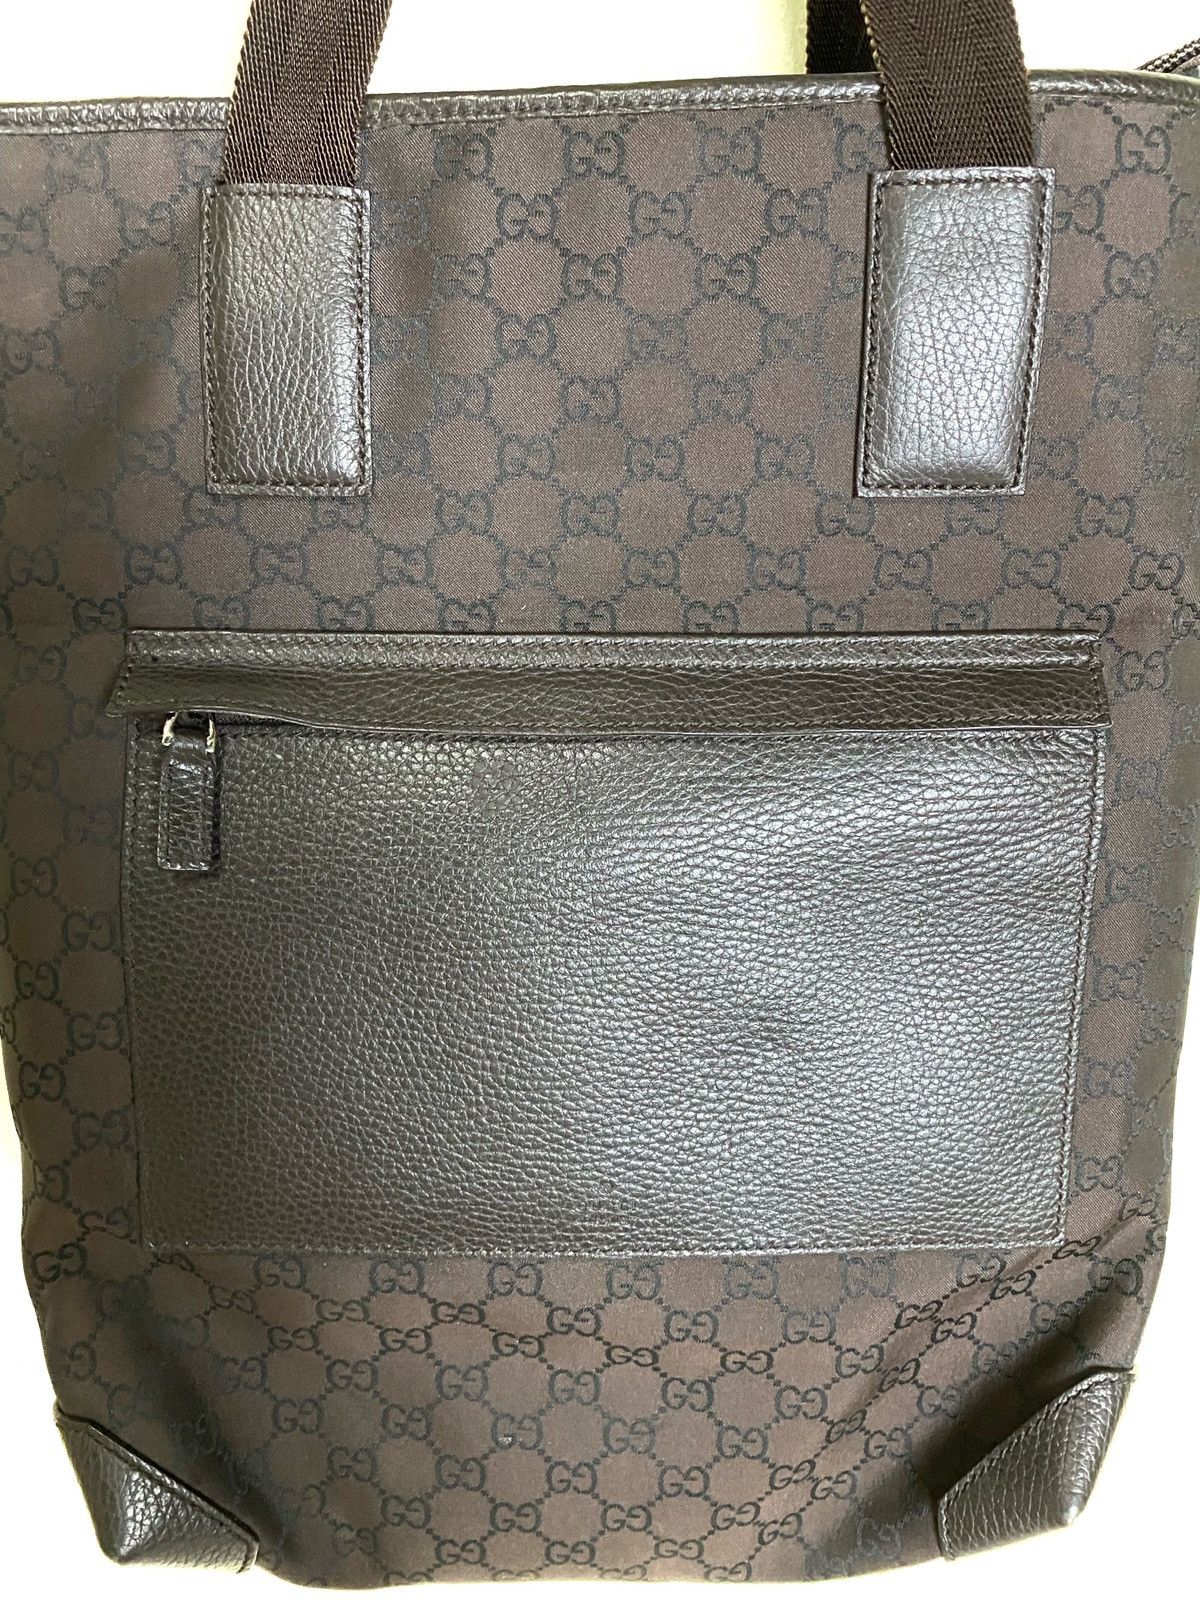 Authentic GUCCI Monogram Tall Tote Bag - 5